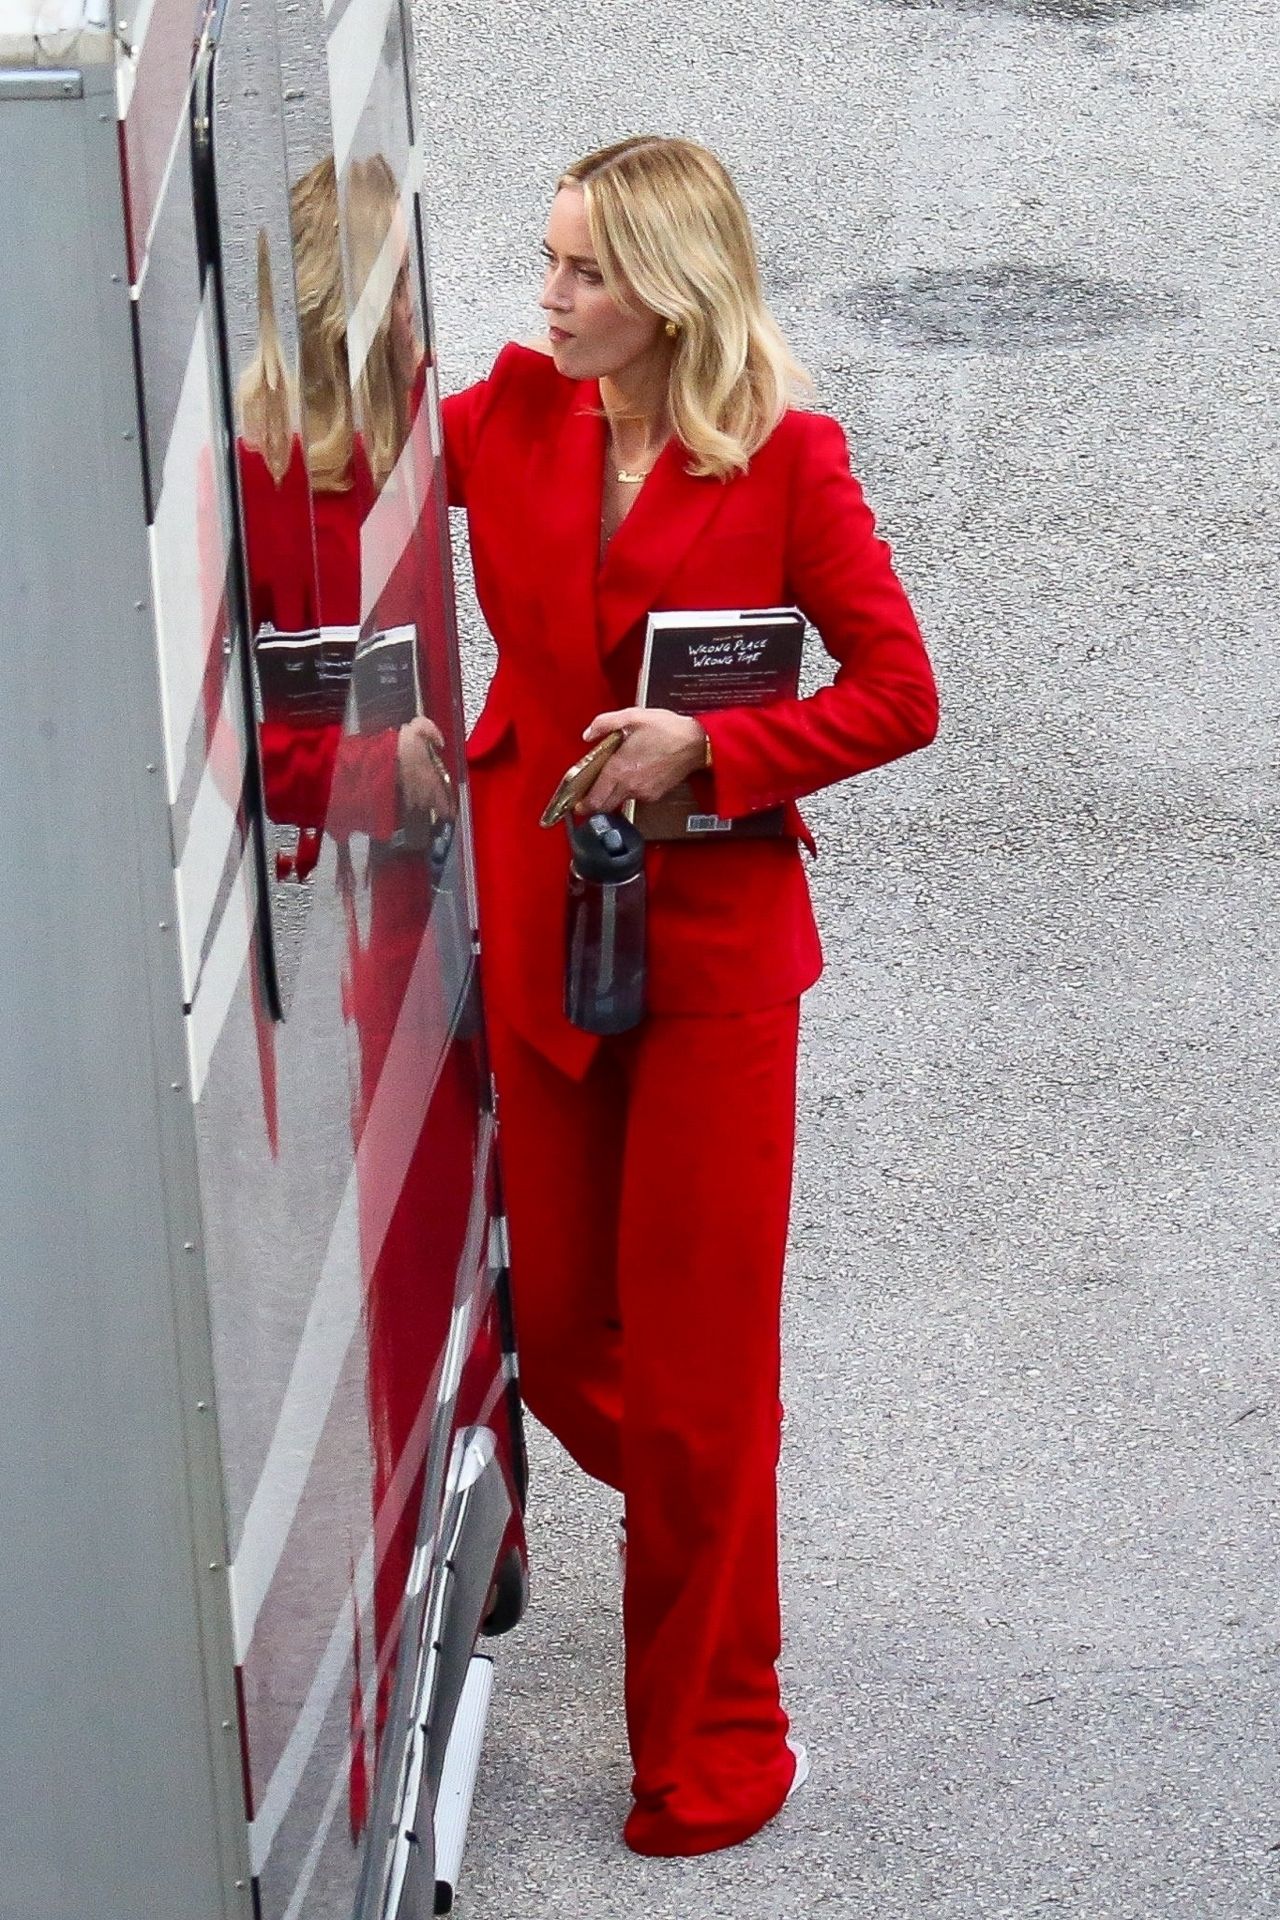 Emily Blunt - "The Pain Hustlers" Filming in Miami 08/29/2022.